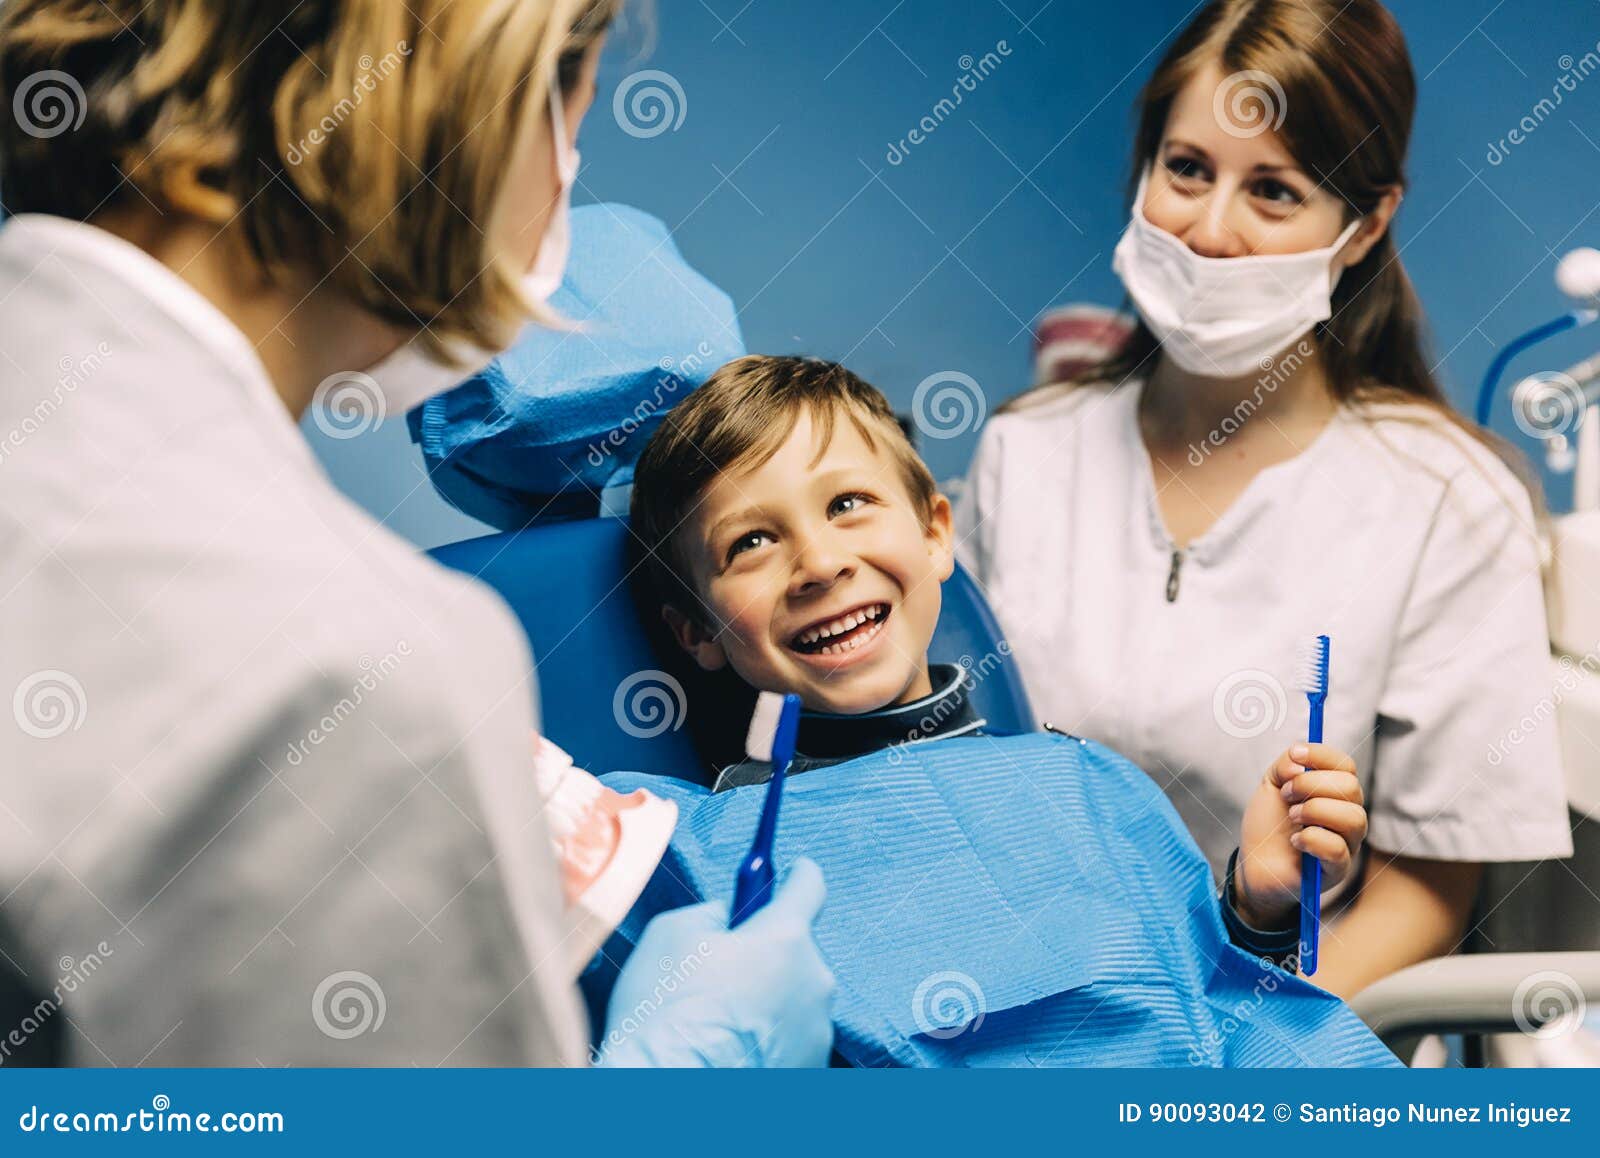 Doctor Dentist Teaching A Child To Brush Teeth. Stock